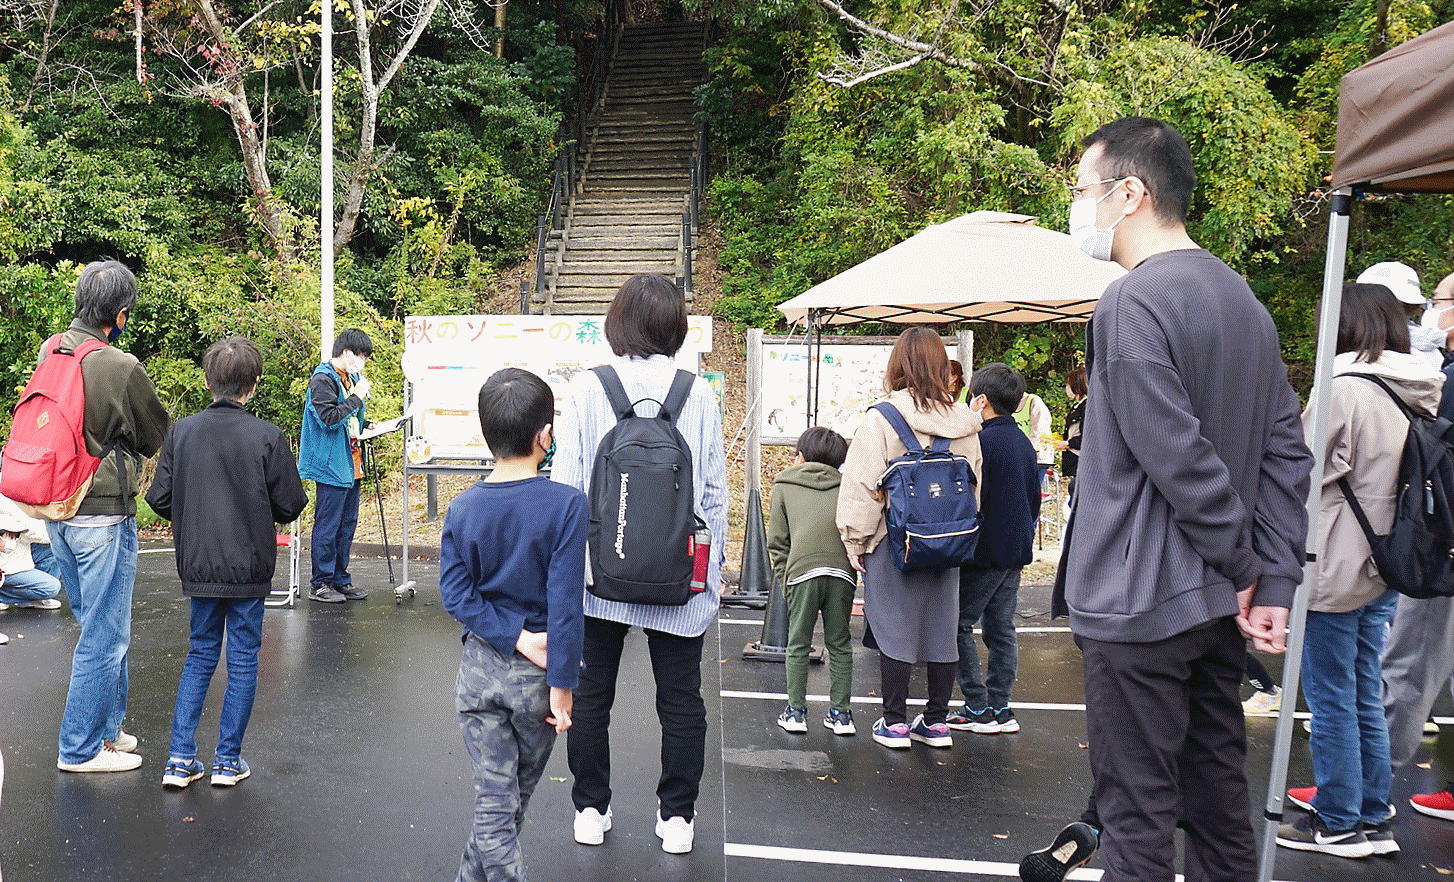 Photograph showing environmental awareness event held at a forest within Kohda site, Japan